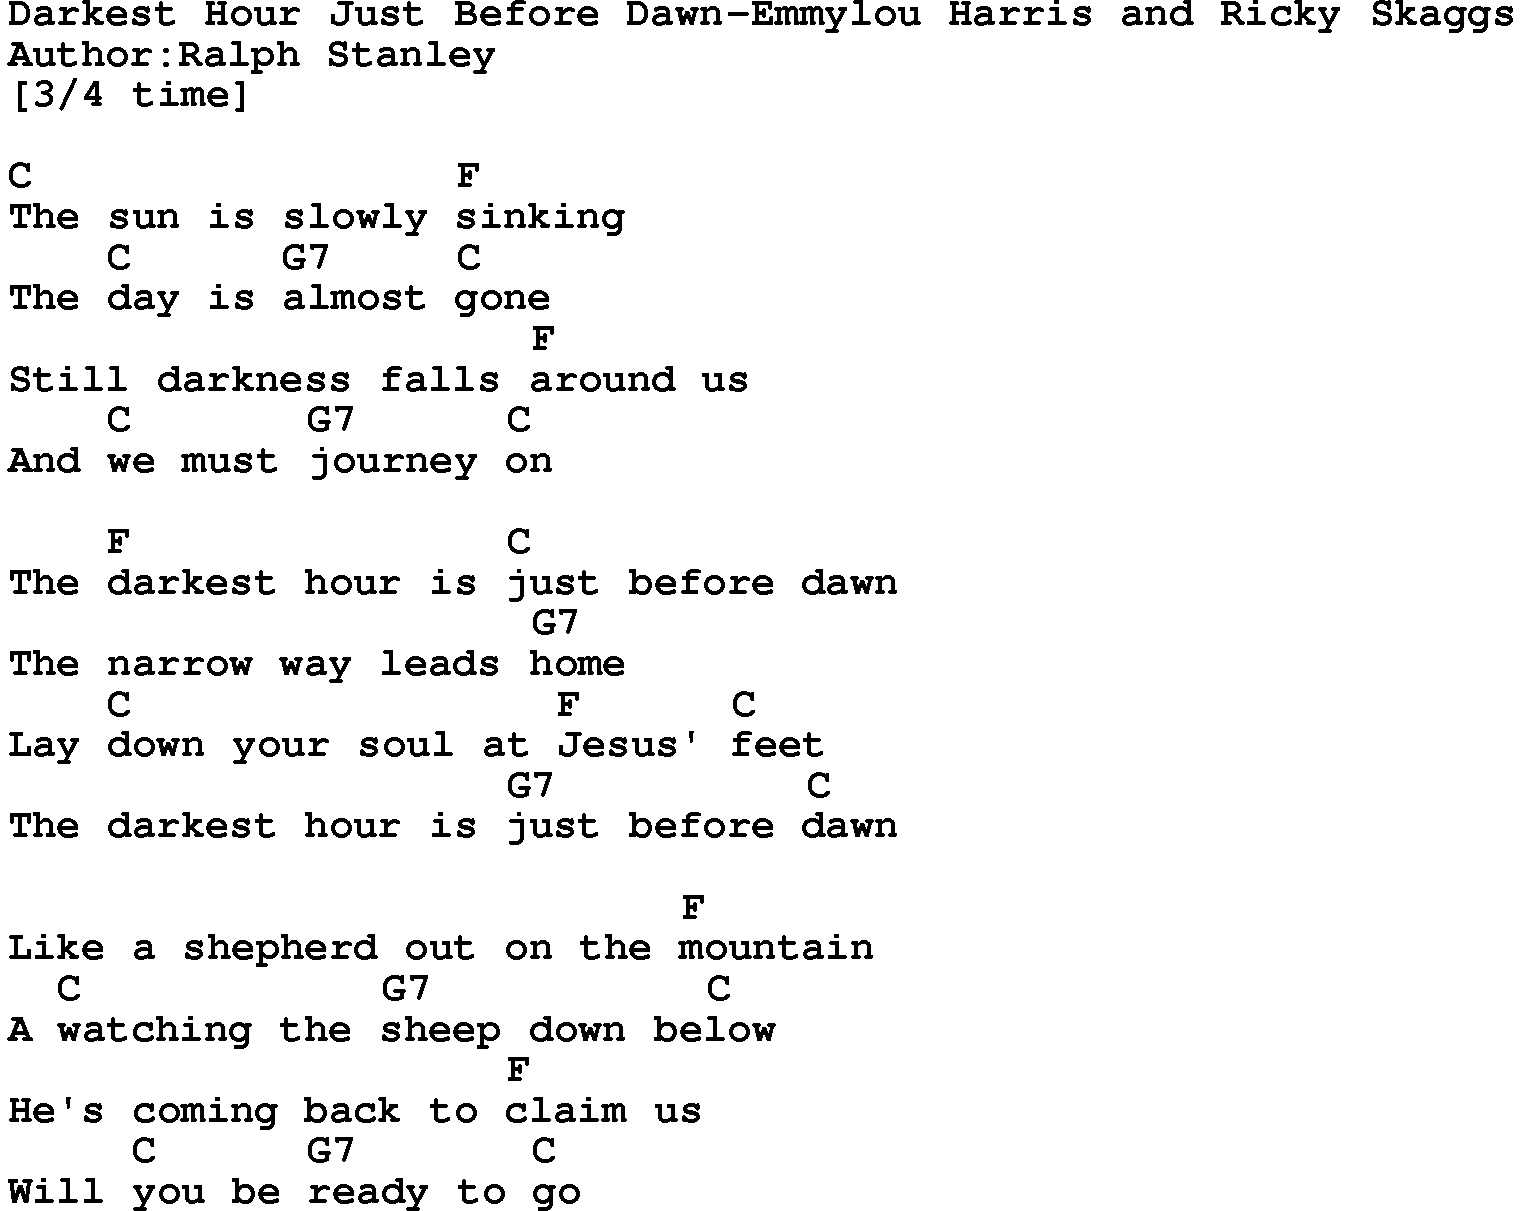 Country music song: Darkest Hour Just Before Dawn-Emmylou Harris And Ricky Skaggs lyrics and chords